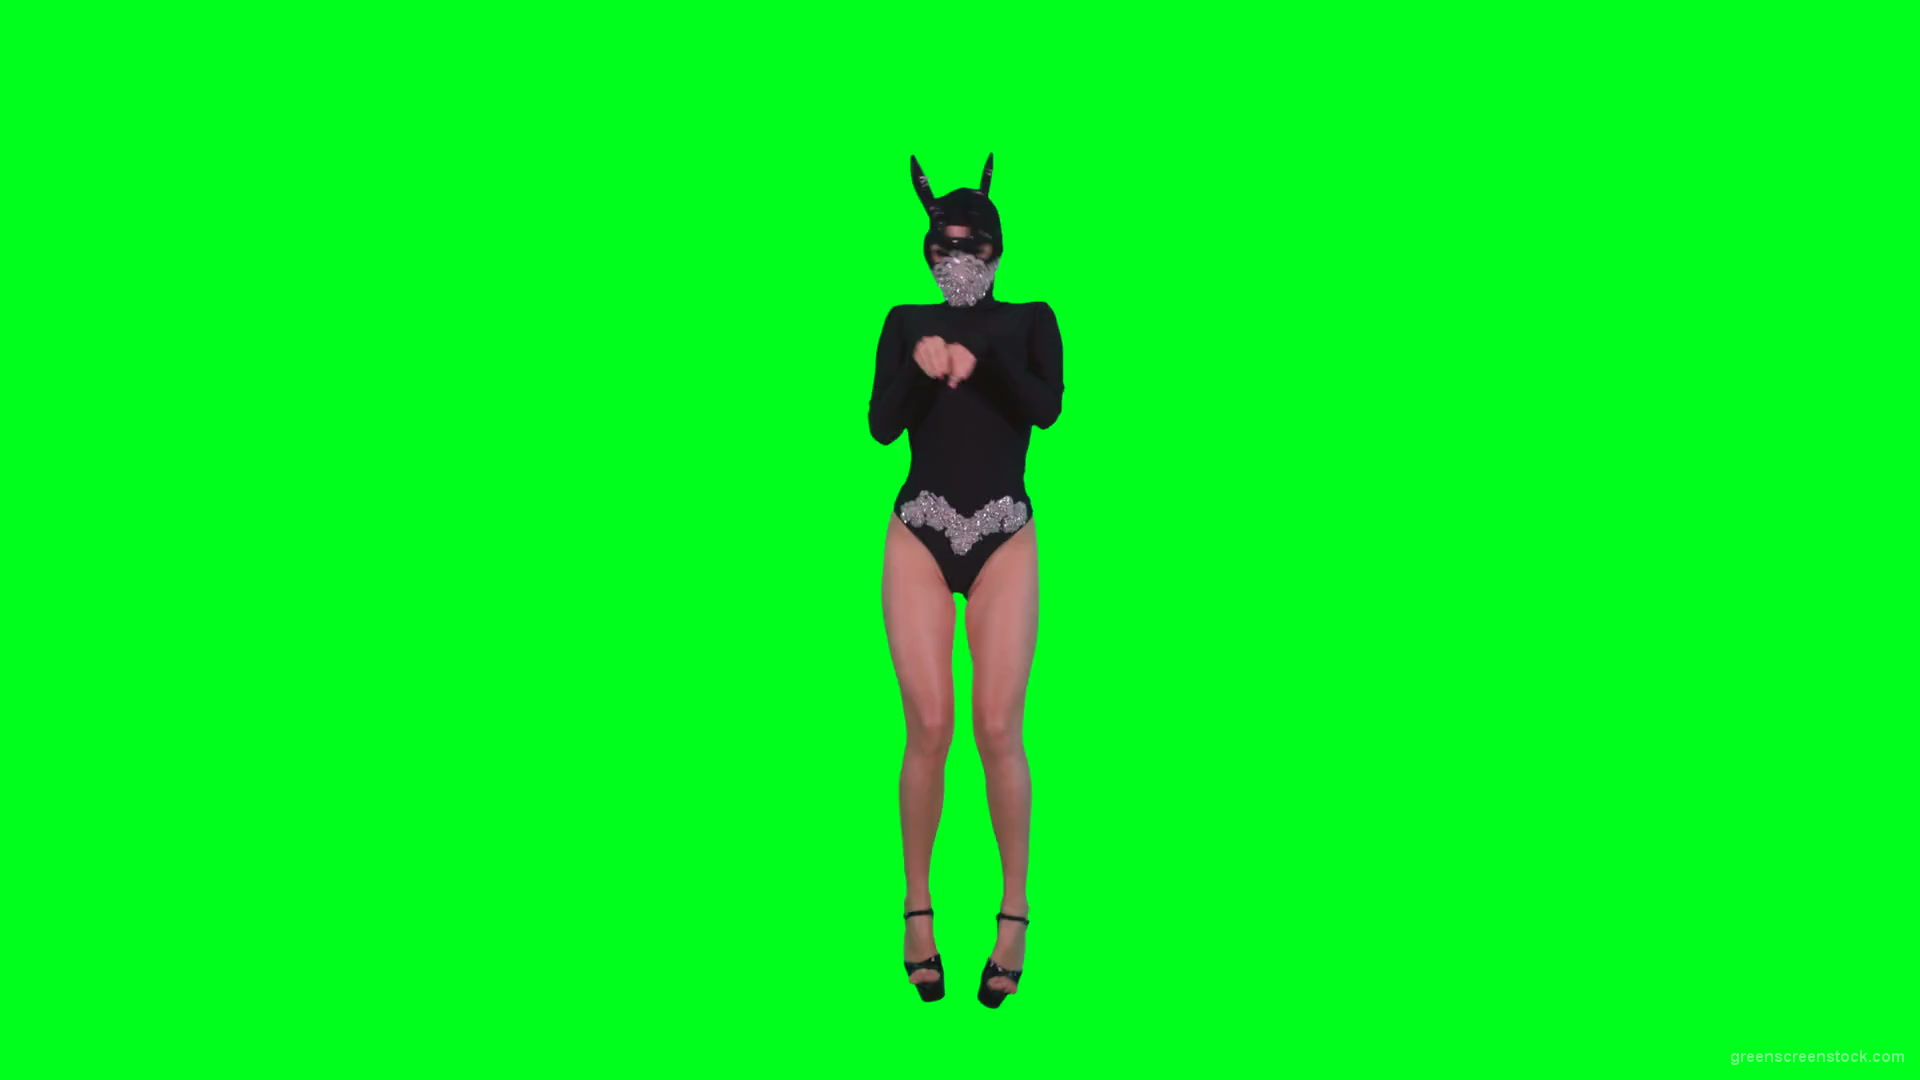 Go-Go-Dancing-Girl-in-Rabbit-Mask-jumping-in-black-costume-on-Green-Screen-4K-Video-Footage-1920_001 Green Screen Stock